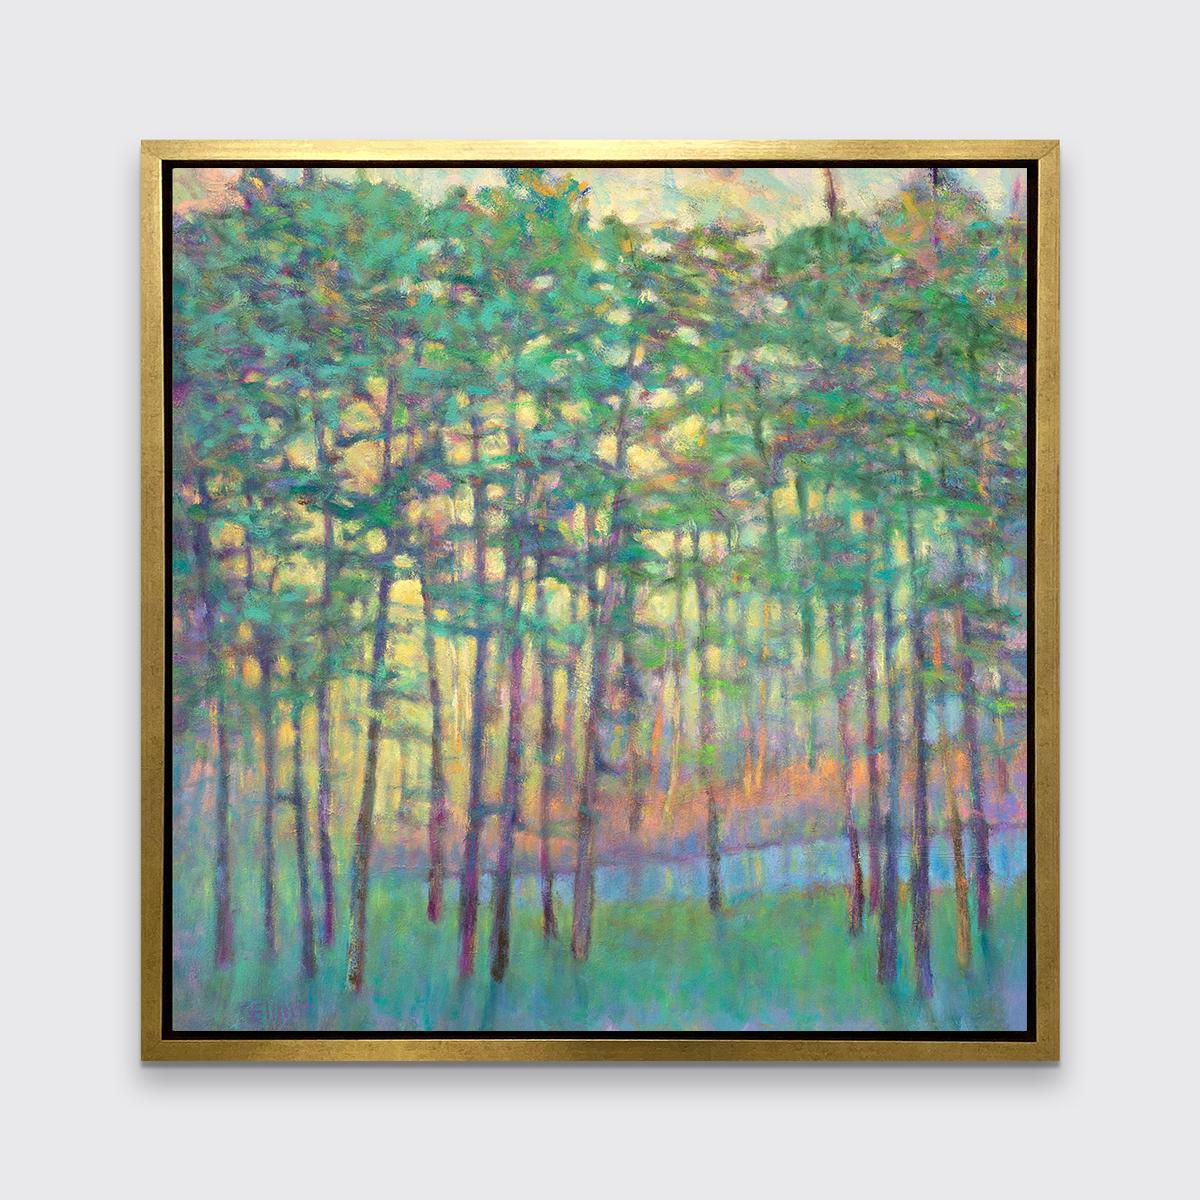 This abstract landscape limited edition print by Ken Elliott features a bright palette and an impressionistic style. The forest scene is rendered with a vibrant green connecting the foreground and the leaves of the trees, with warmer strokes of